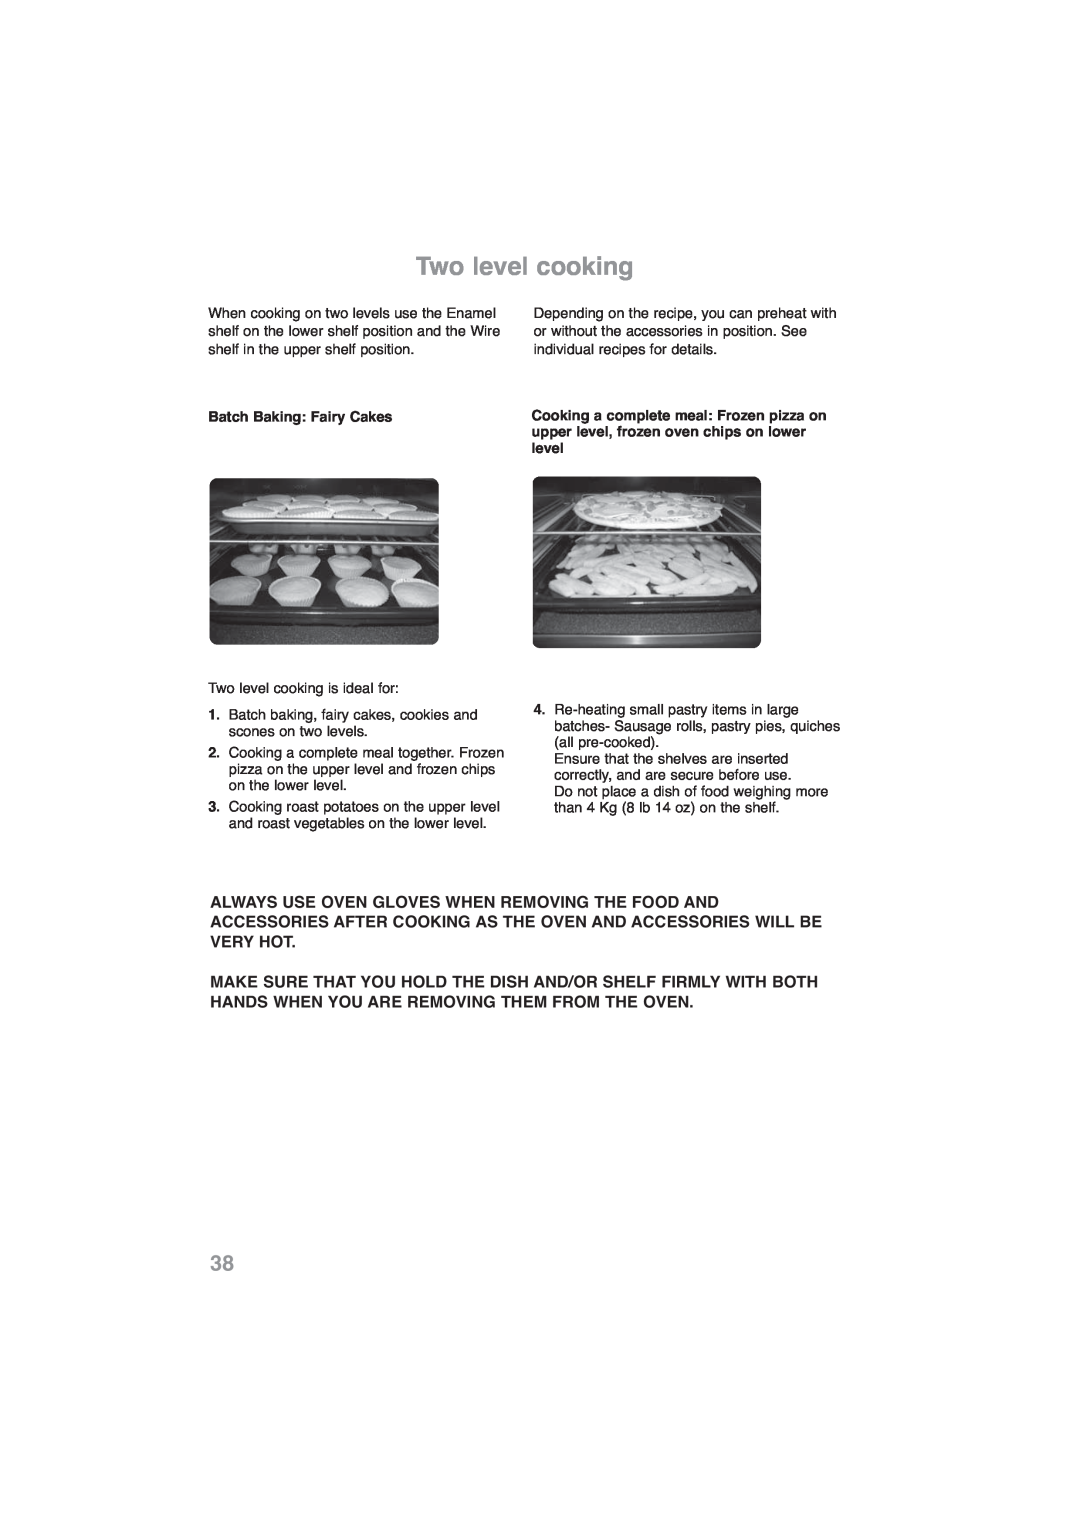 Panasonic NN-CF768M, NN-CF778S operating instructions Two level cooking, Batch Baking: Fairy Cakes 